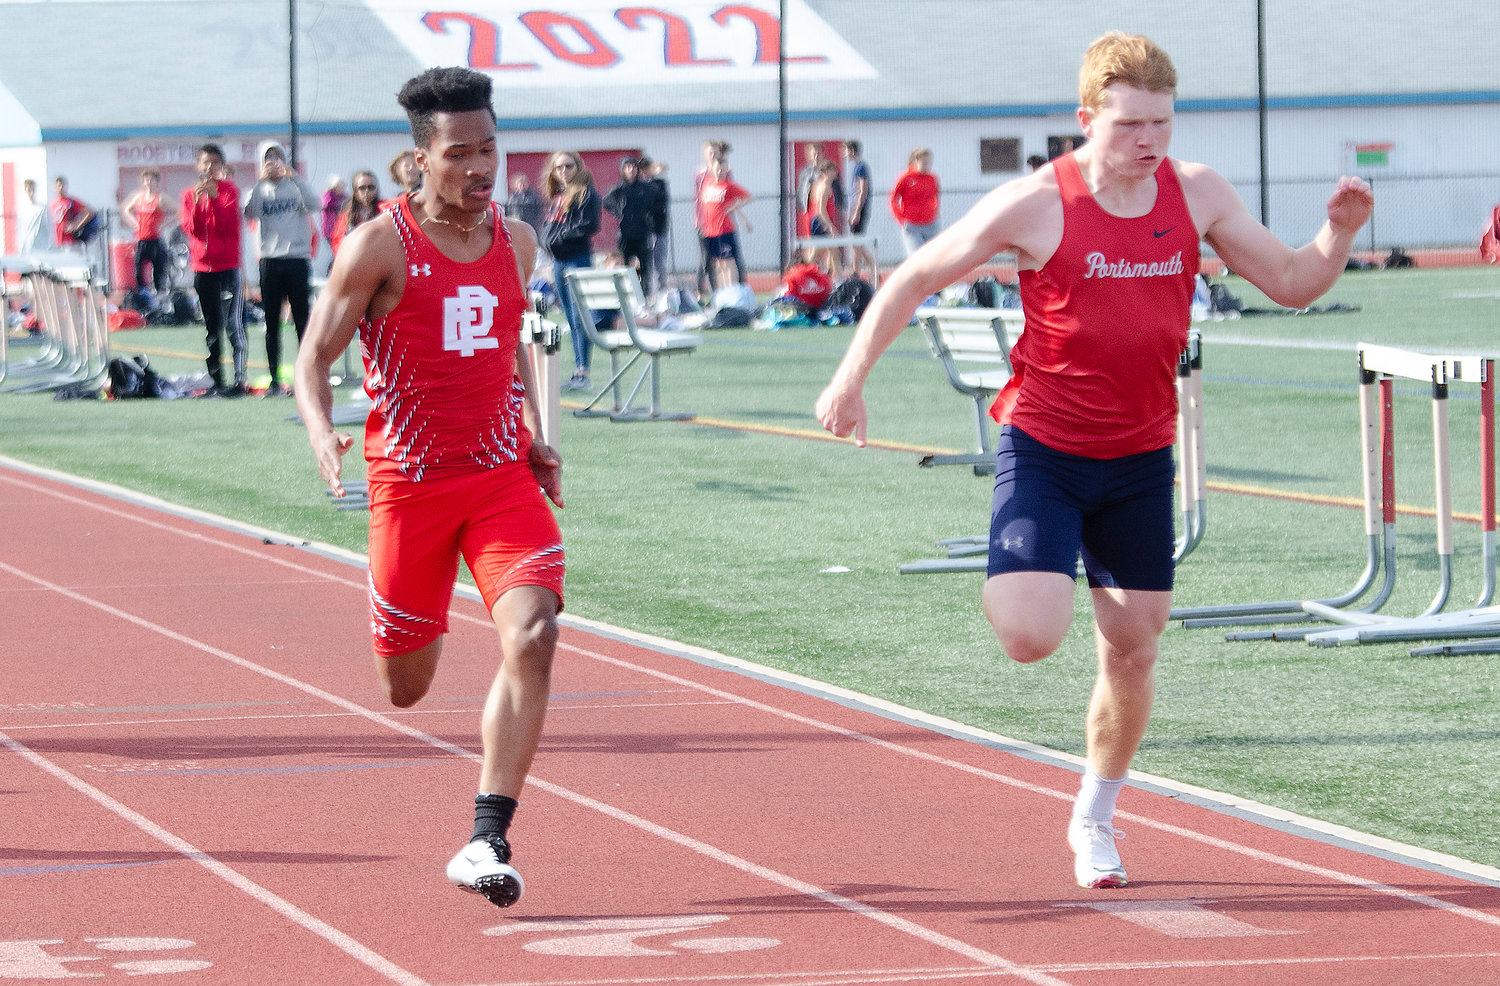 Portsmouth’s Colby Fahrney (right) nips Kit Ruddick at the finish of the 100-meter dash. Fahrney won with a time of 11.6 seconds.